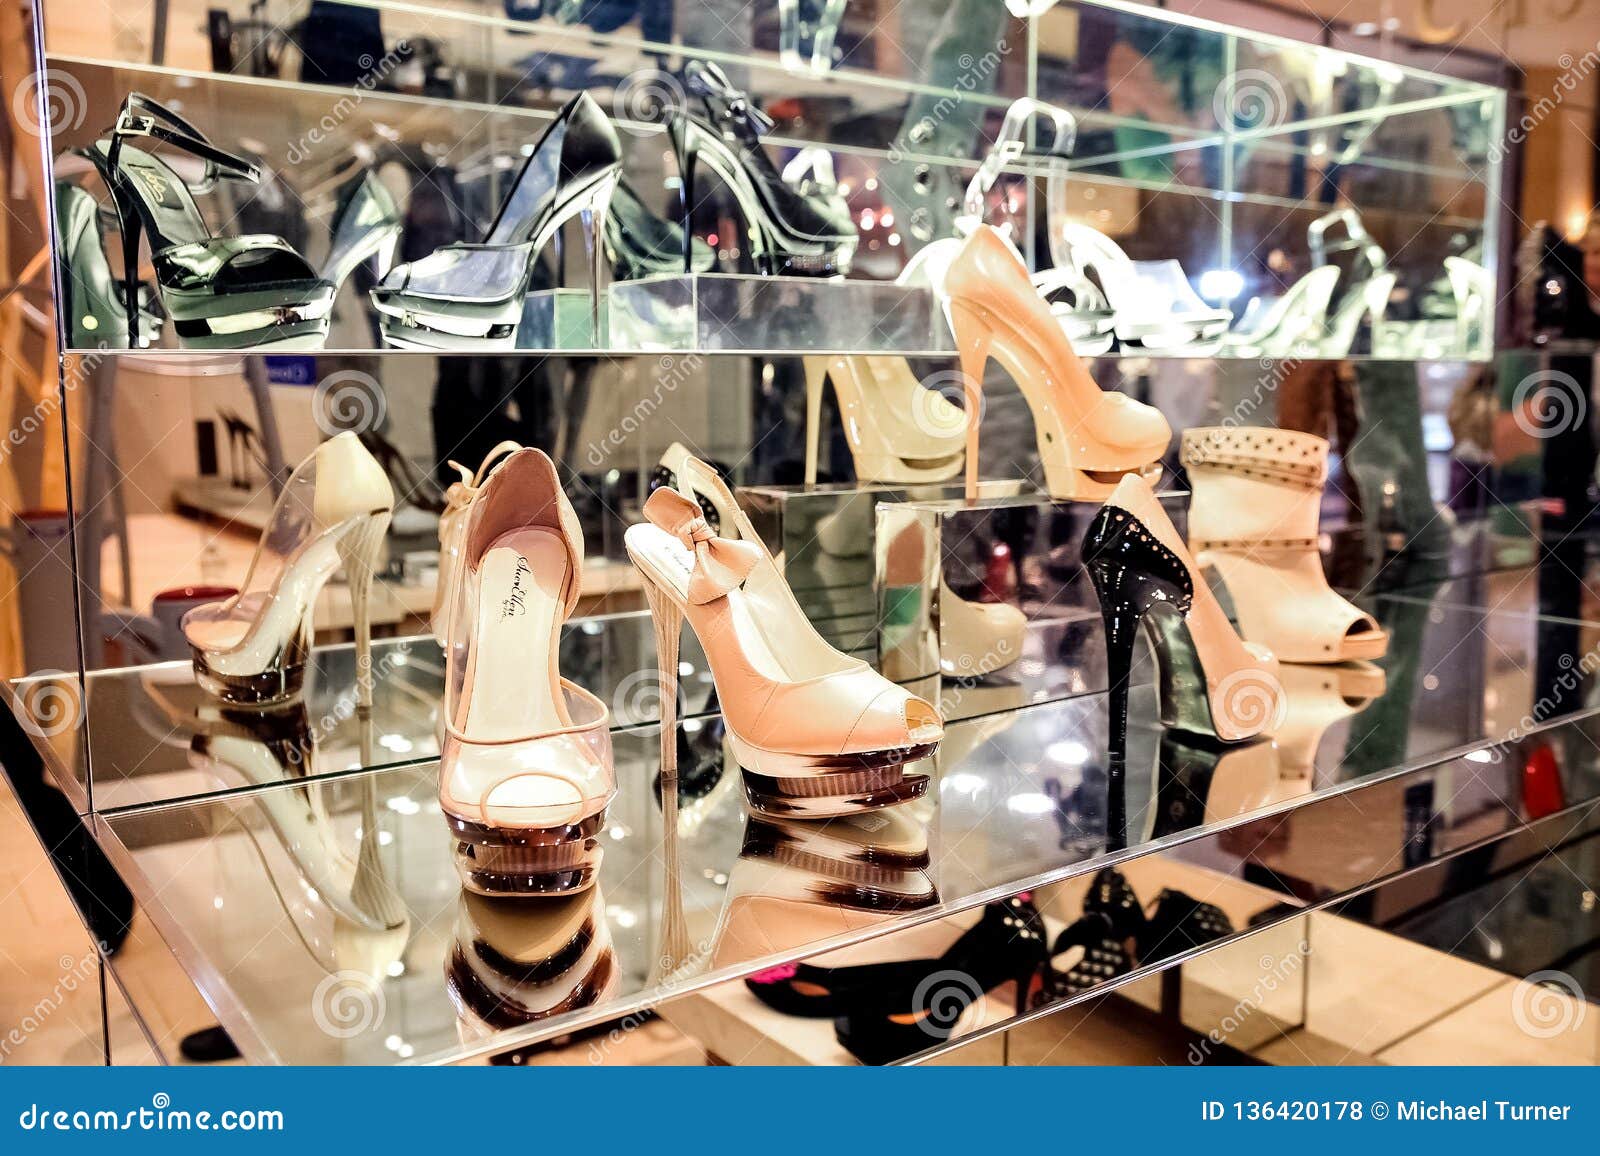 Shoes and Handbags in an Up-Market Fashion Clothing Retail Store ...